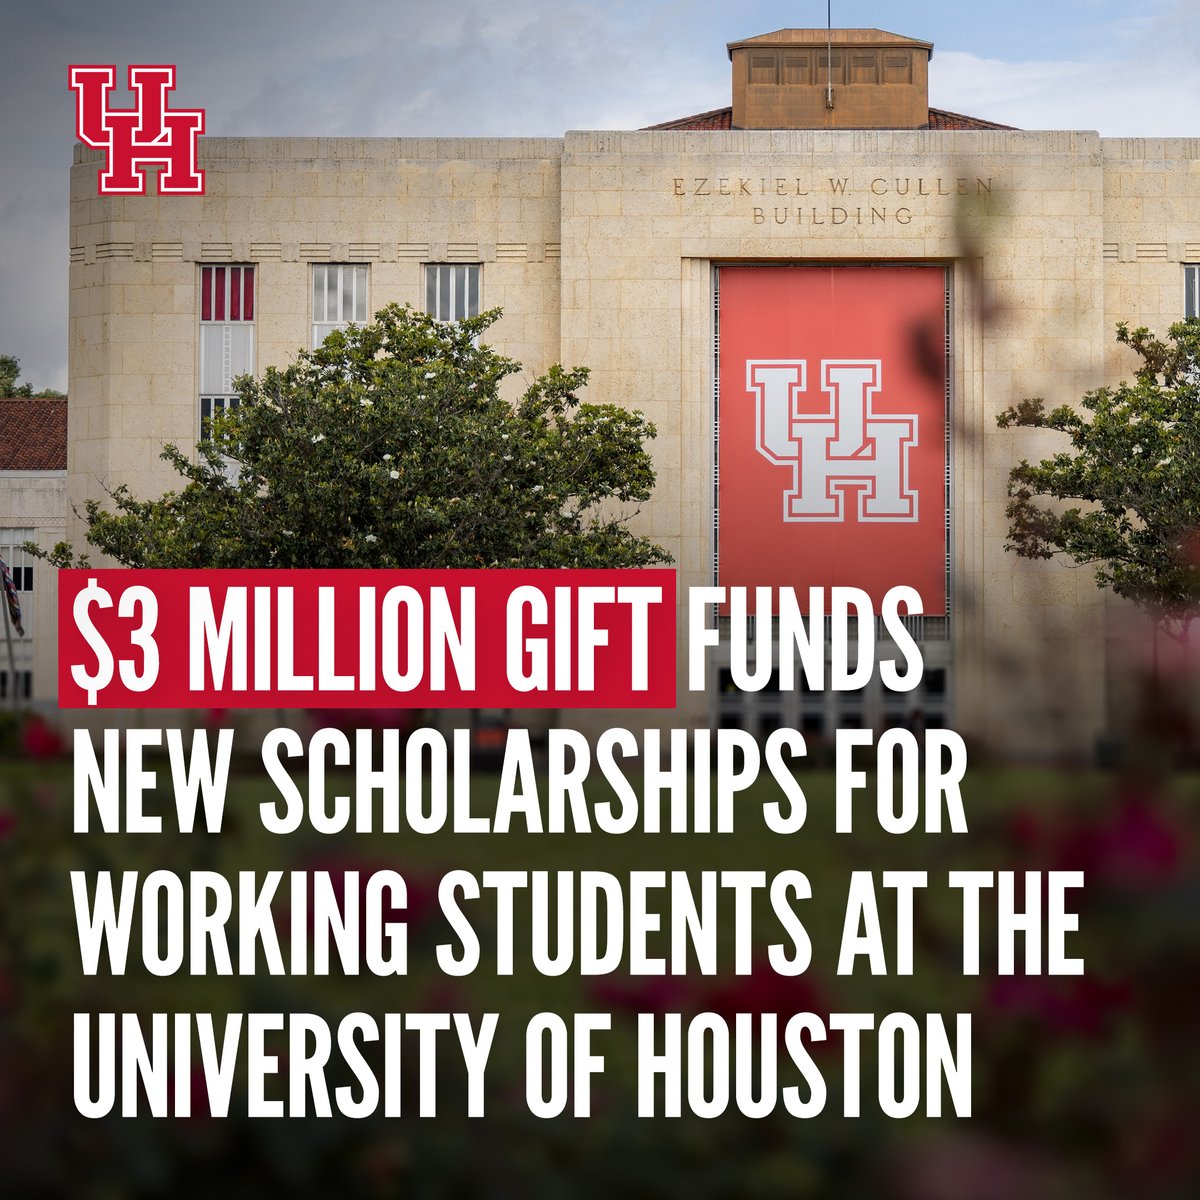 Funded by an anonymous donor, the scholarship award for full-time, working students will be $4,000 per academic semester, or a maximum annual award of $8,000. More details and requirements here: uh.edu/news-events/st…